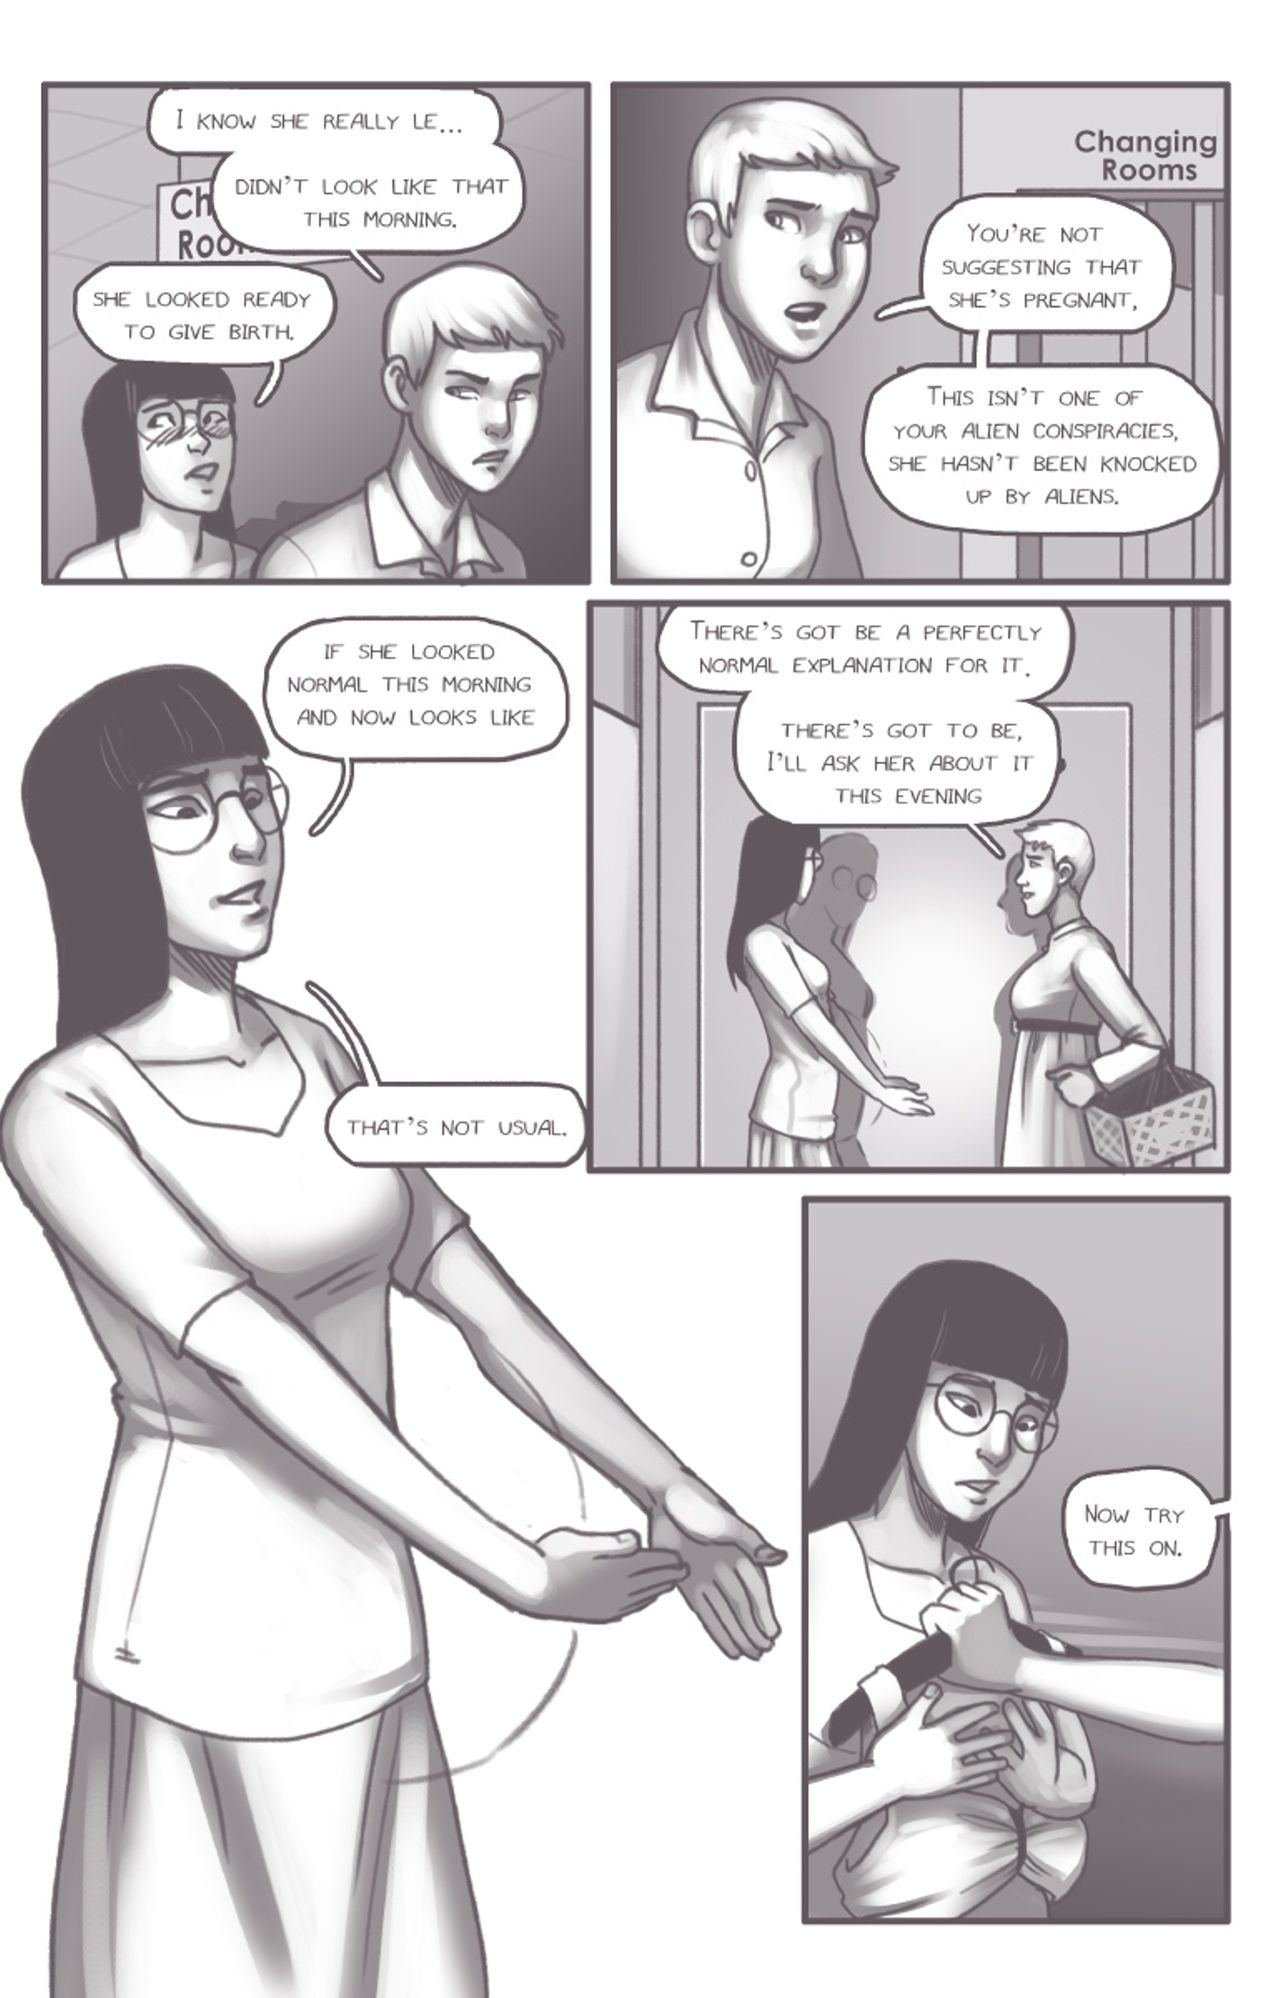 [Olympic-Dames] Alien Pregnancy Expansion Comic Updated (Ongoing) 22